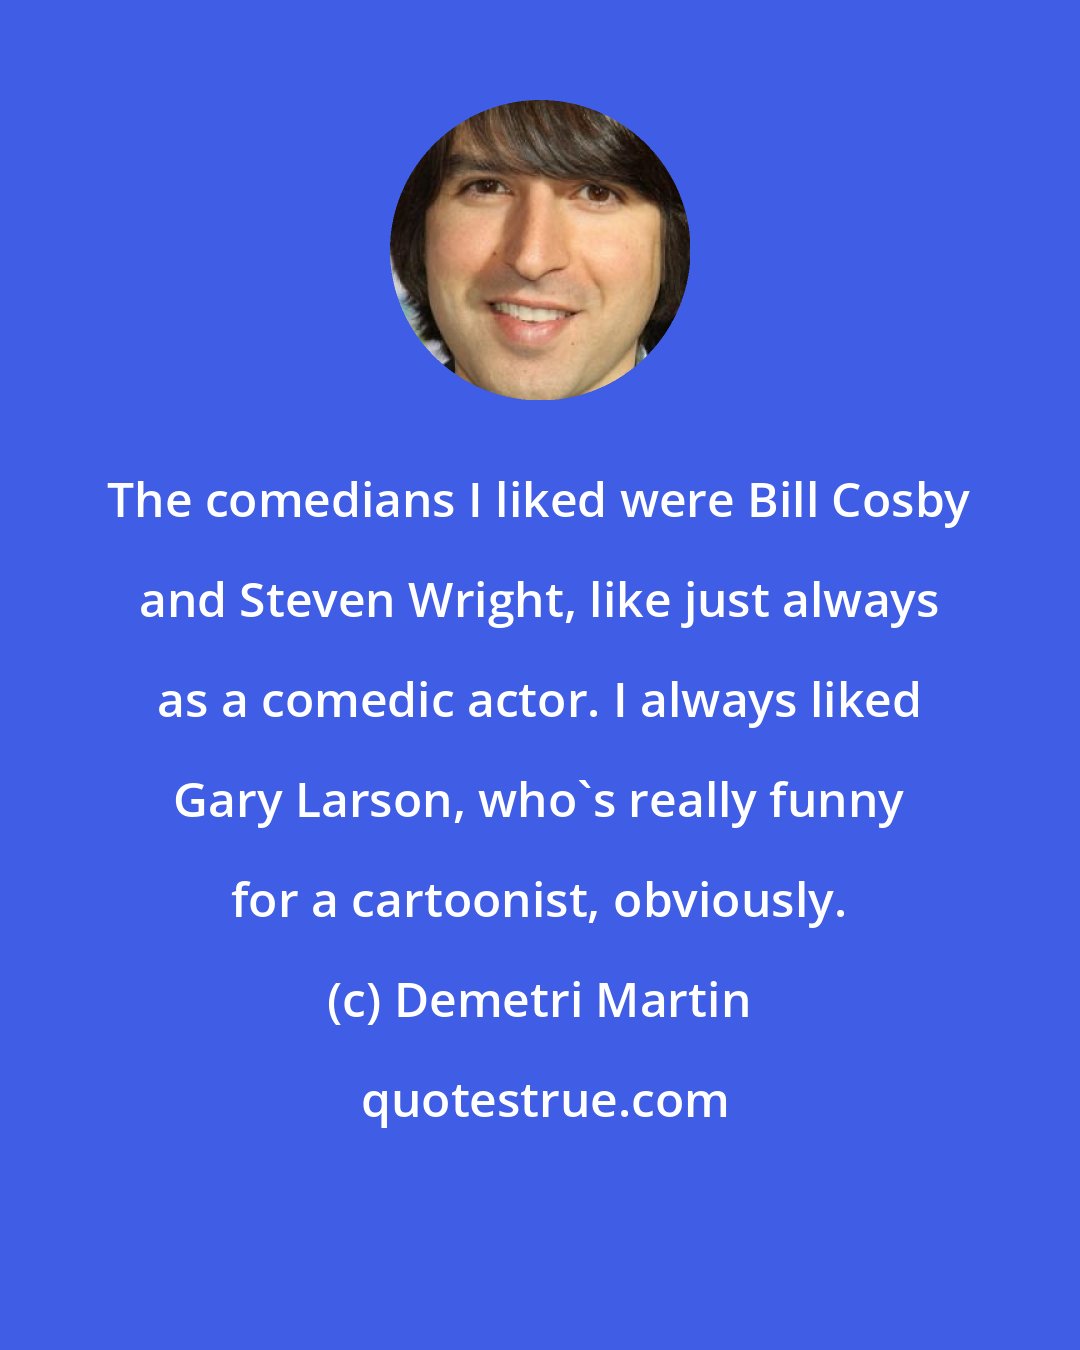 Demetri Martin: The comedians I liked were Bill Cosby and Steven Wright, like just always as a comedic actor. I always liked Gary Larson, who's really funny for a cartoonist, obviously.